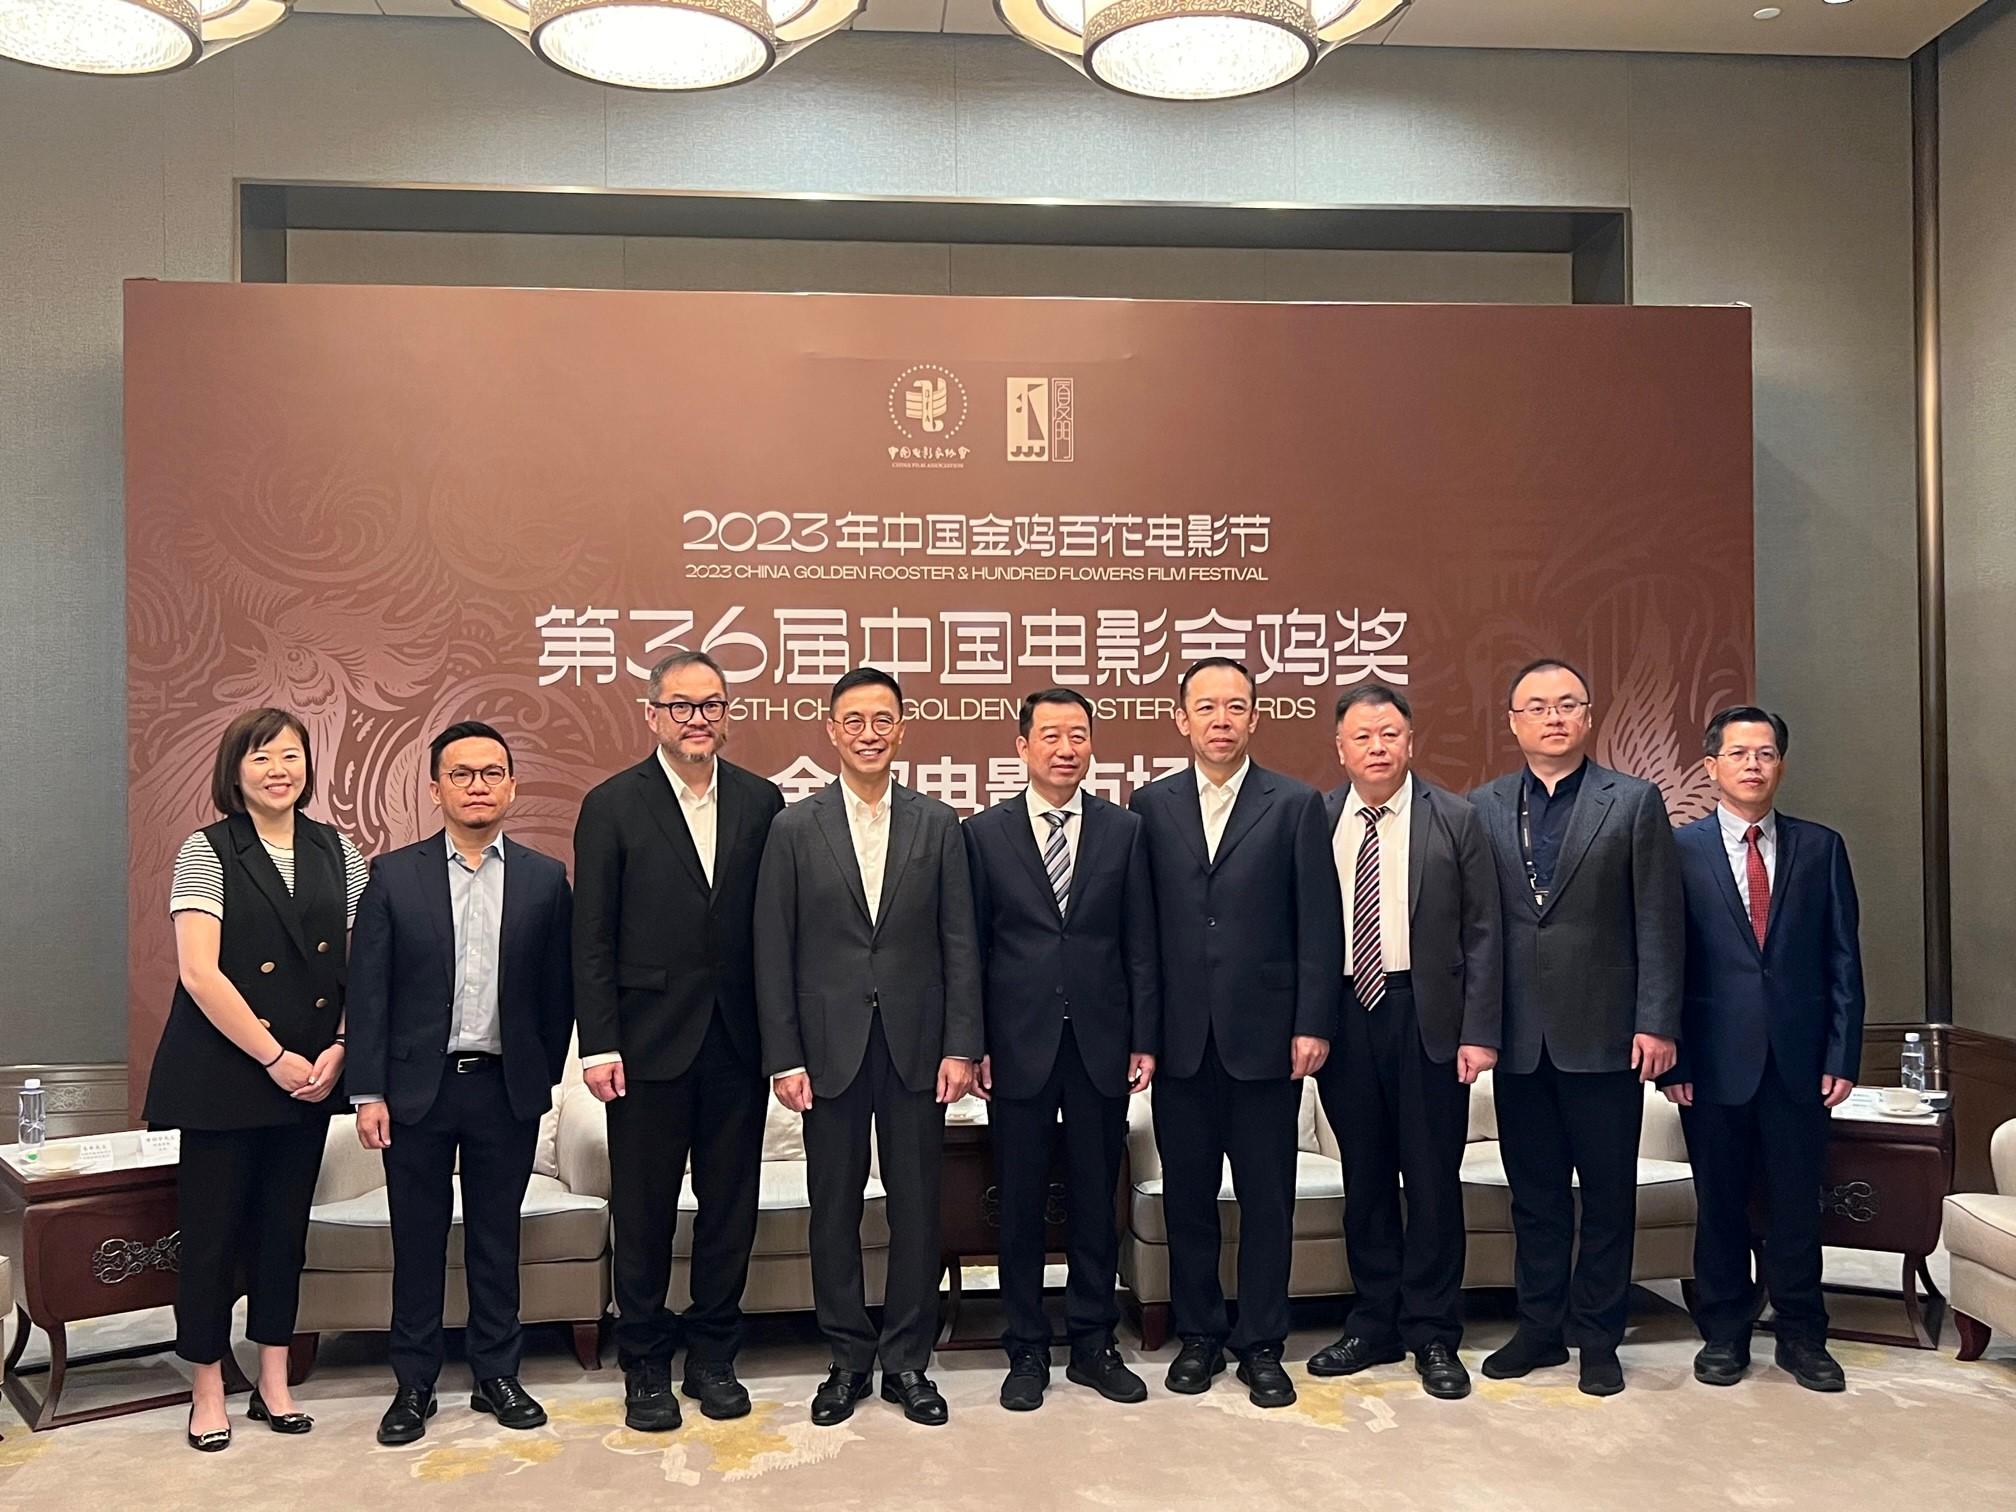 The Secretary for Culture, Sports and Tourism, Mr Kevin Yeung (fourth left), met with the Sub-Party Secretary of the China Film Association, Mr Zhang Hong (fifth right); the Deputy Director-General of the China Film Administration, Mr Bai Yimin (fourth right); and the Director General of the Xiamen Film Administration, Mr Shangguan Jun (third right), in Xiamen today (November 2). The Head of Create Hong Kong, Mr Victor Tsang (third left), was also present.